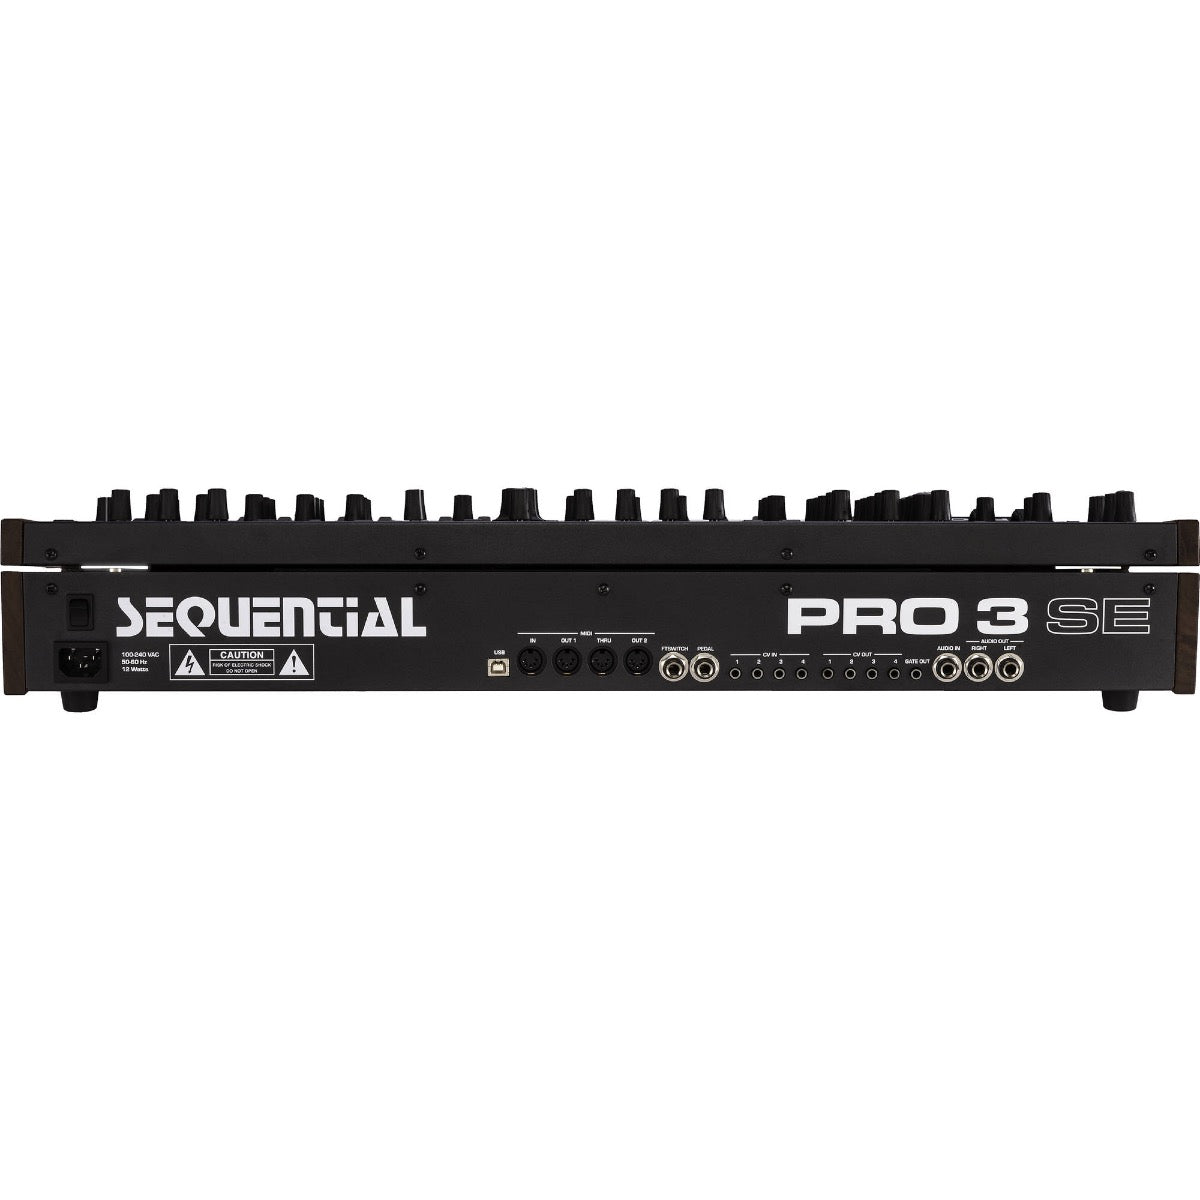 Sequential PRO 3 SE Special Edition Multi-Filter Mono/3-Voice Synthesizer